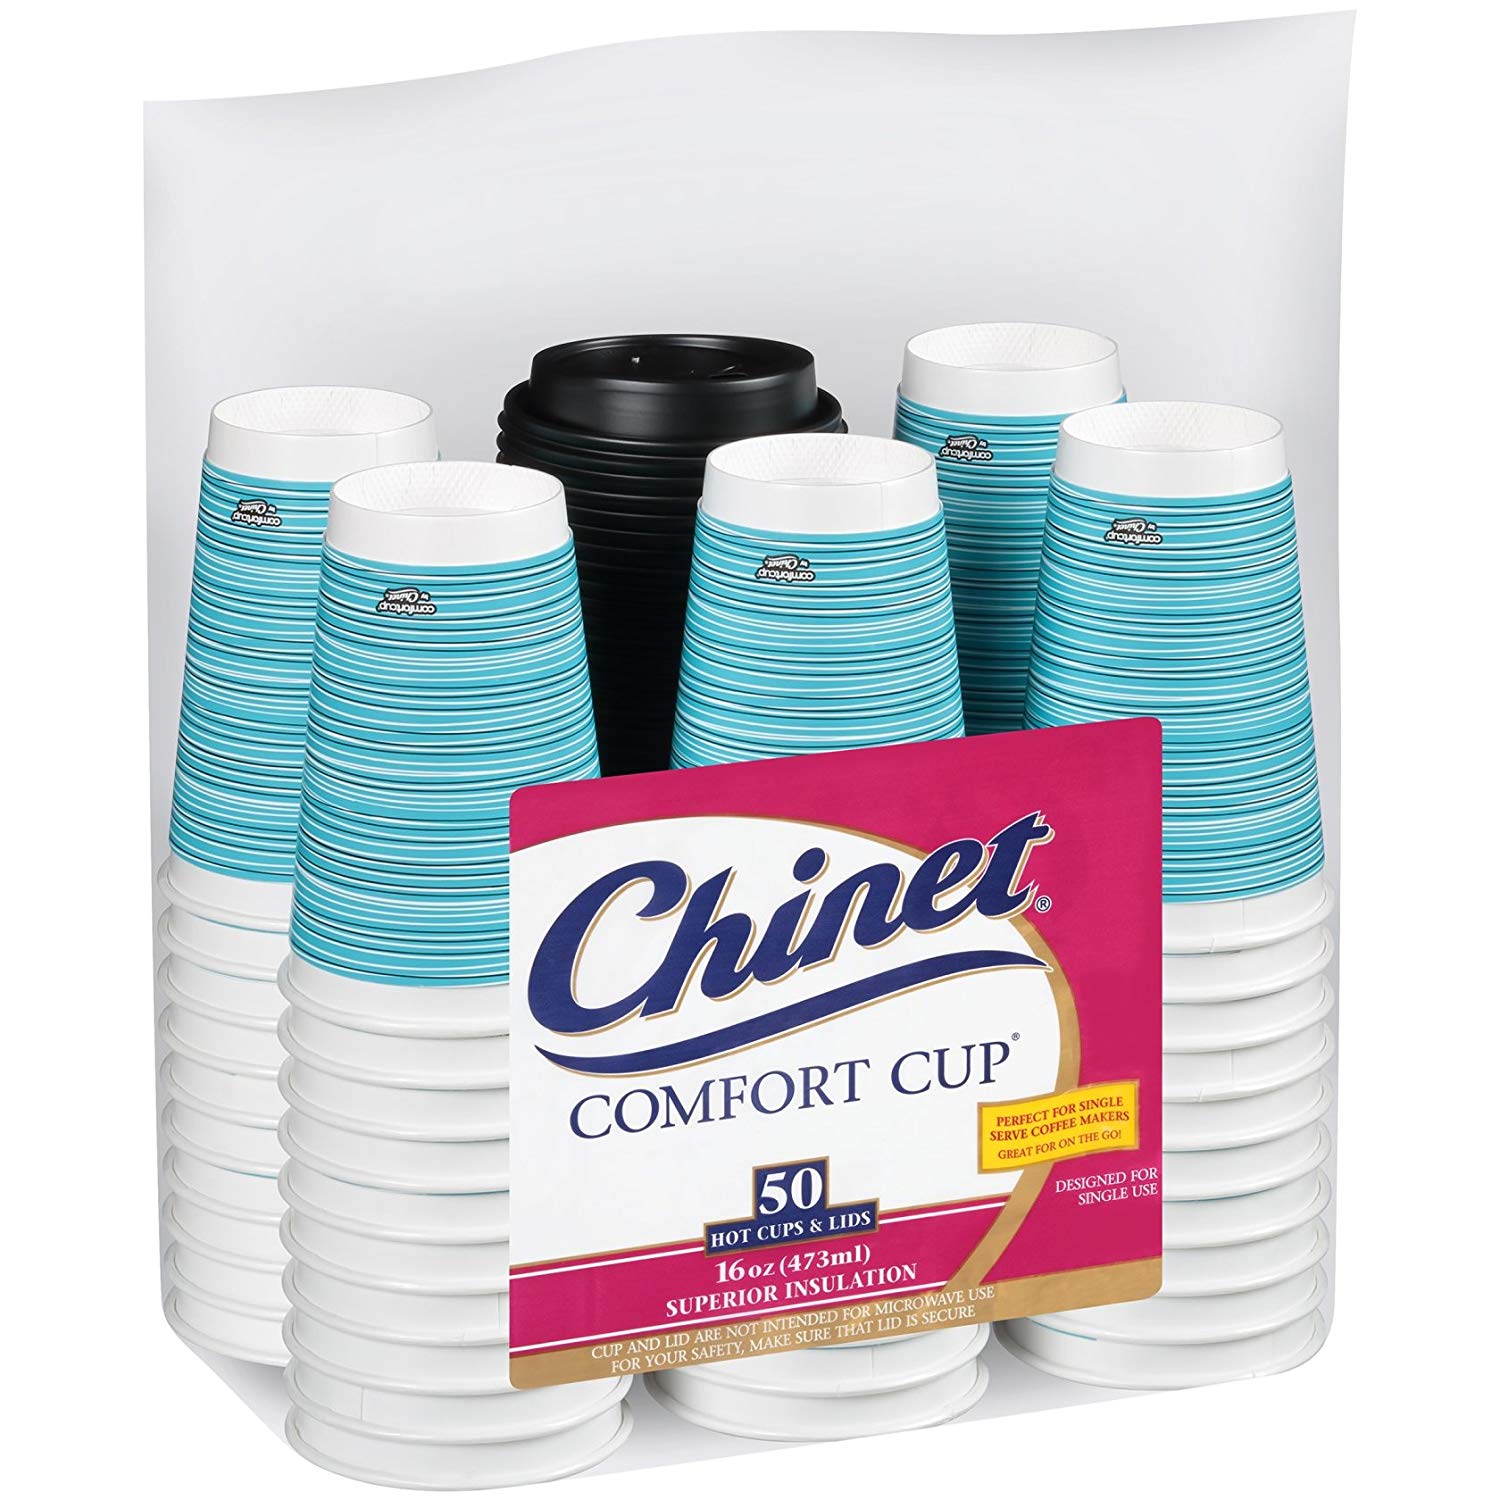 Chinet Comfort Cup 16-Ounce Cups, 50-Count Cups & Lids $11.70 (REG $23.81)